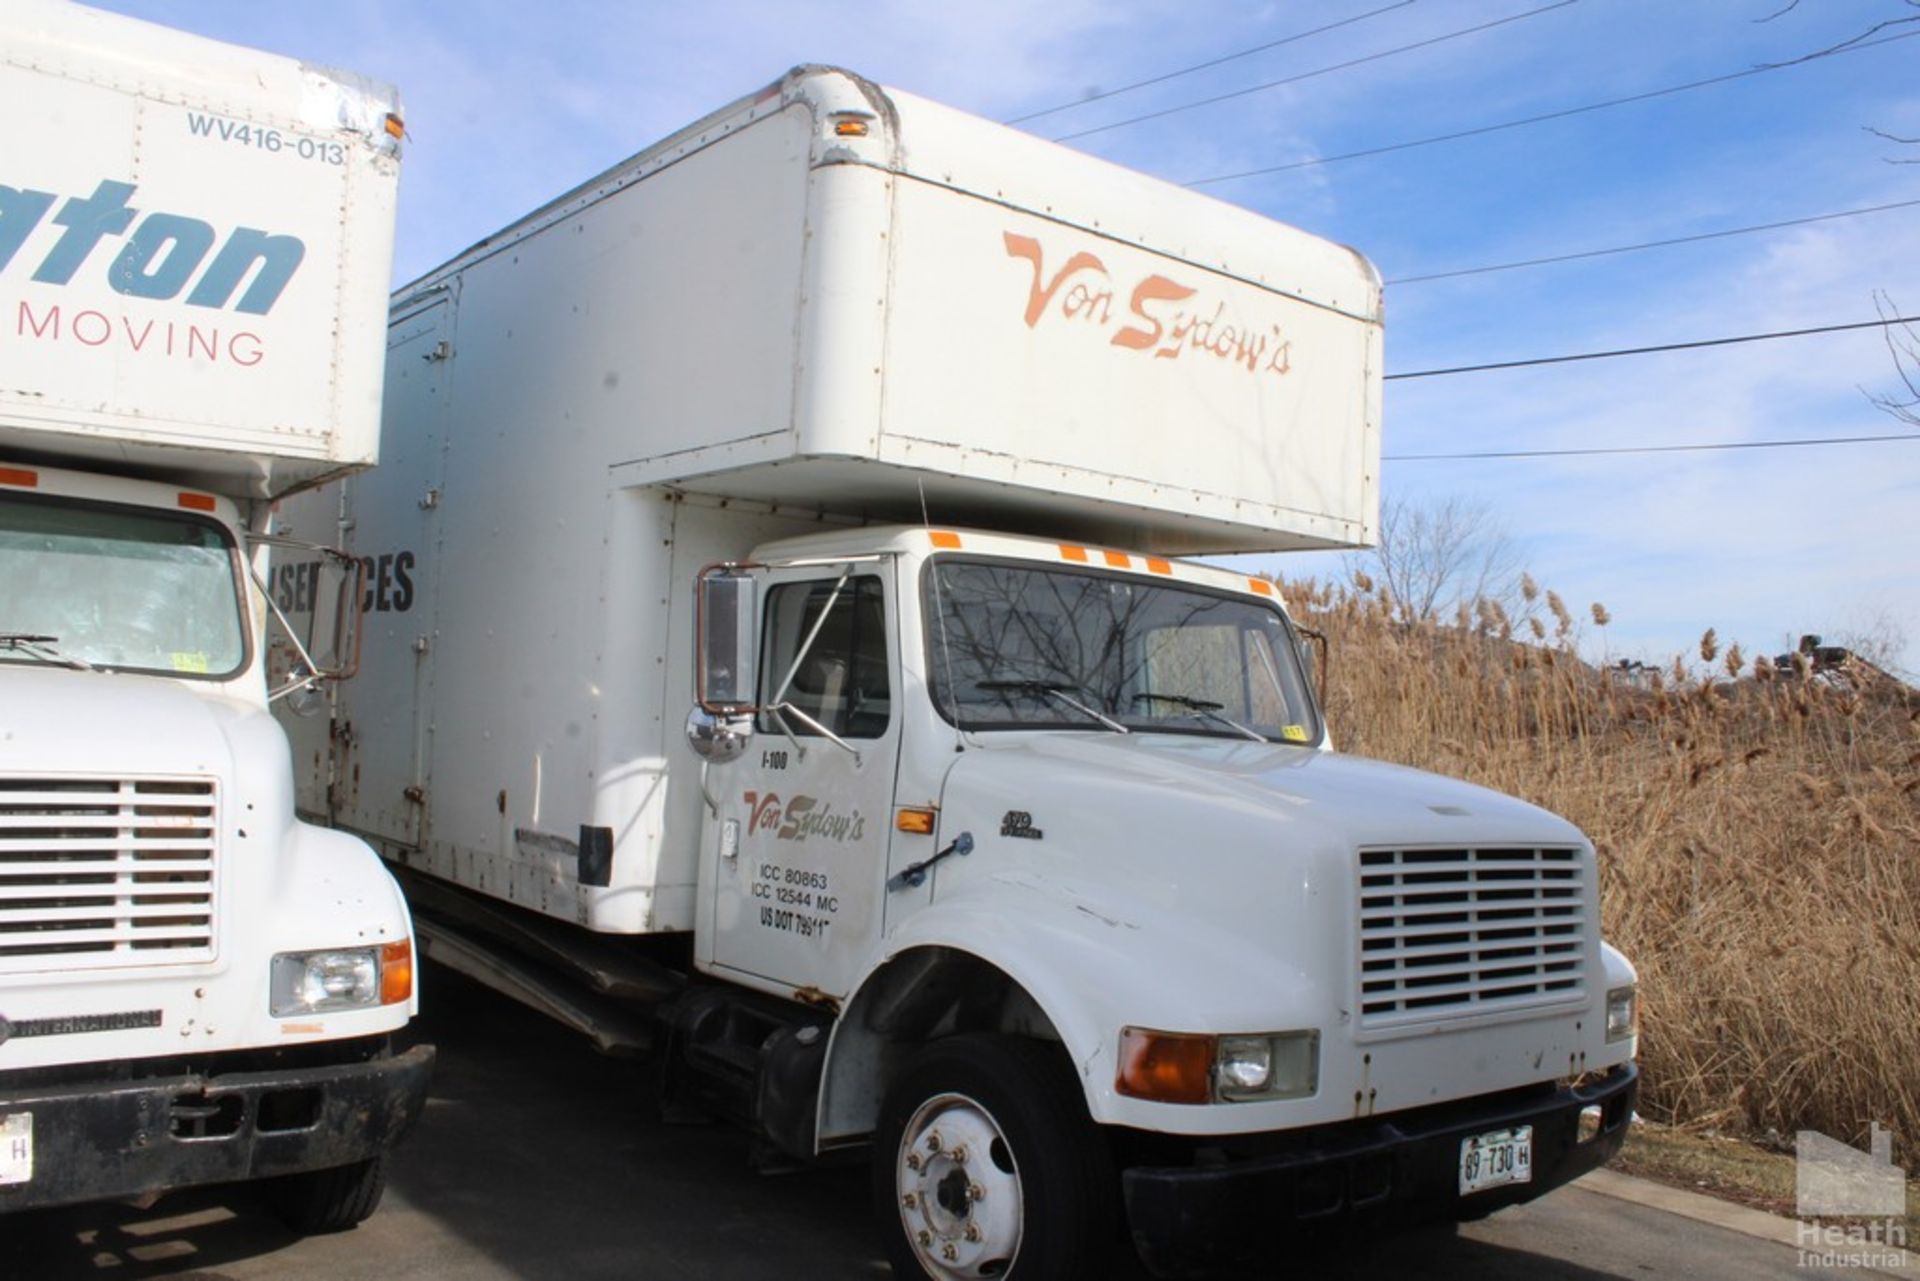 1998 INTERNATIONAL 4700 28FT MOVERS TRUCK, 7.6L L6 DIESEL ENGINE, 162,324 MILES SHOWN ON ODOMETER, - Image 2 of 12